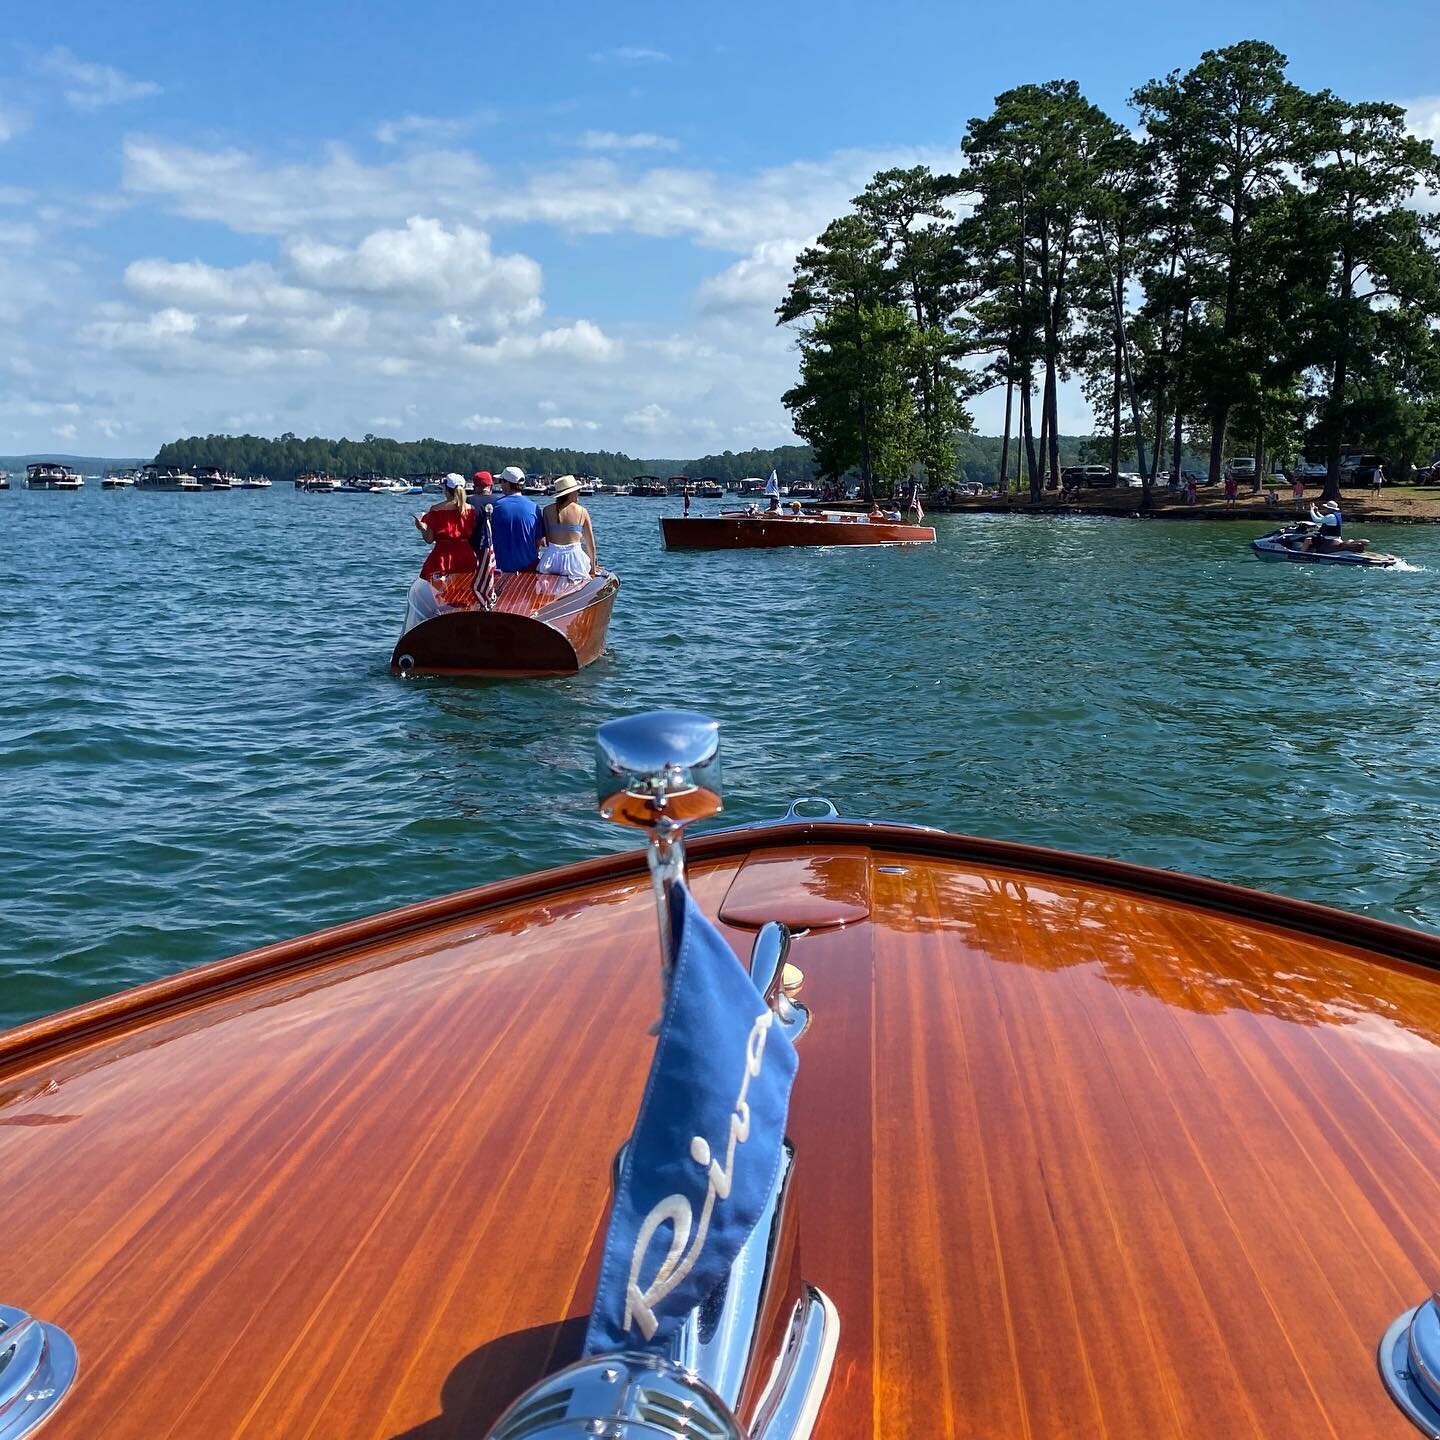 Another great boat parade in the books!  Thanks @russelllands @russellmarineal 
.
#lakemartin #lakemartinal #happy4thofjuly #lakelife